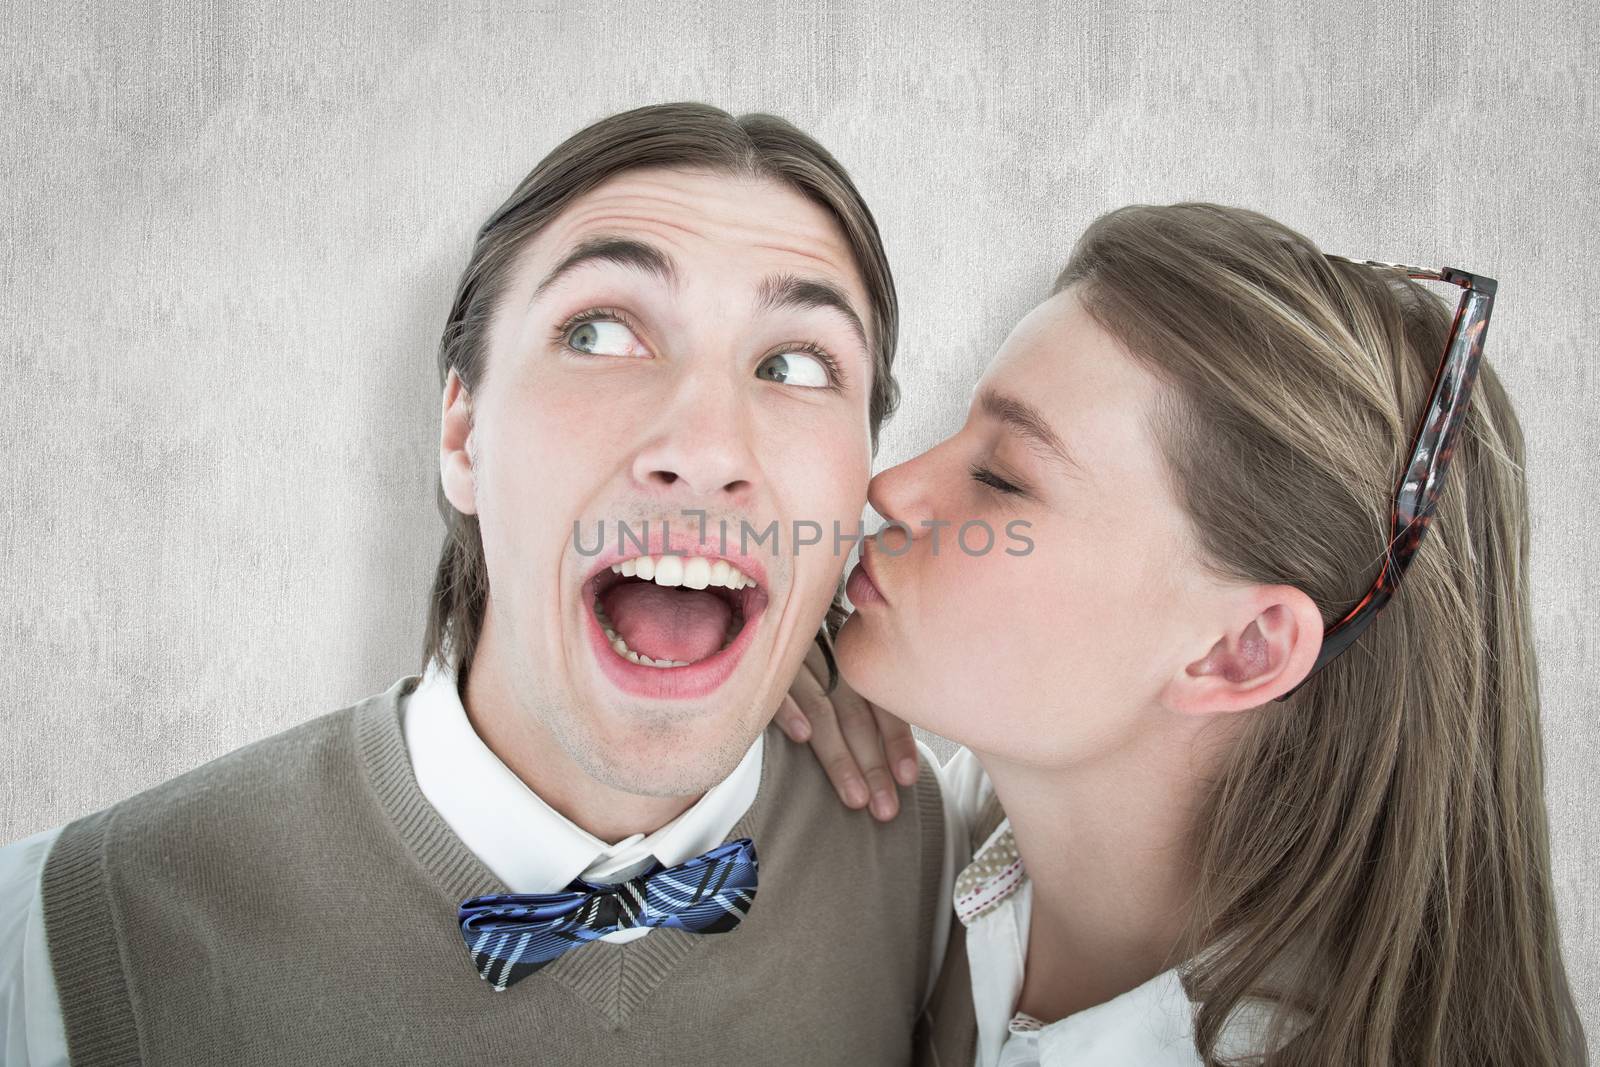 Pretty geeky hipster giving boyfriend kiss on the cheek against white background